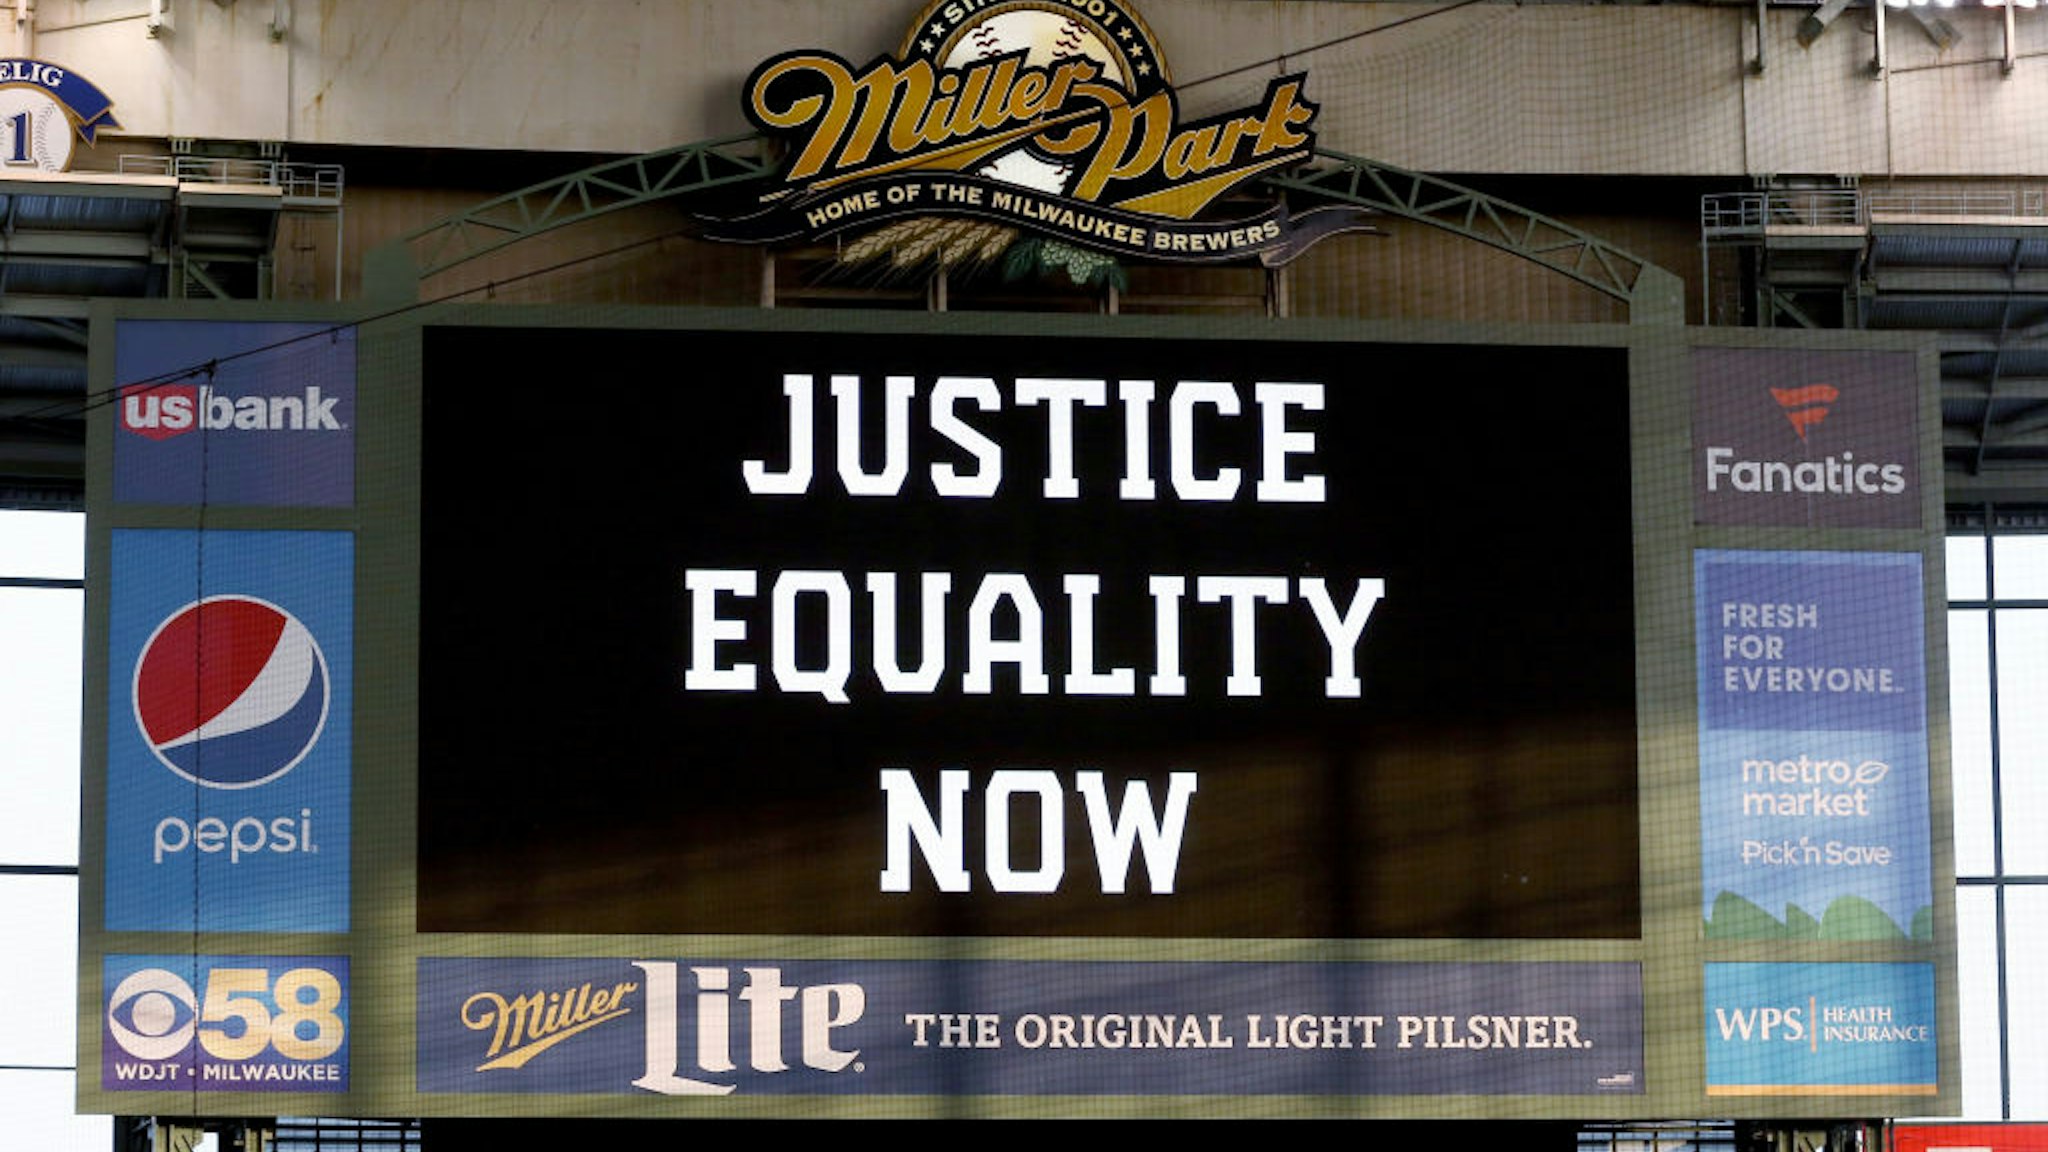 MILWAUKEE, WISCONSIN - AUGUST 25: The scoreboard displays a message of "Justice Equality Now" before the game between the Cincinnati Reds and Milwaukee Brewers at Miller Park on August 25, 2020 in Milwaukee, Wisconsin.